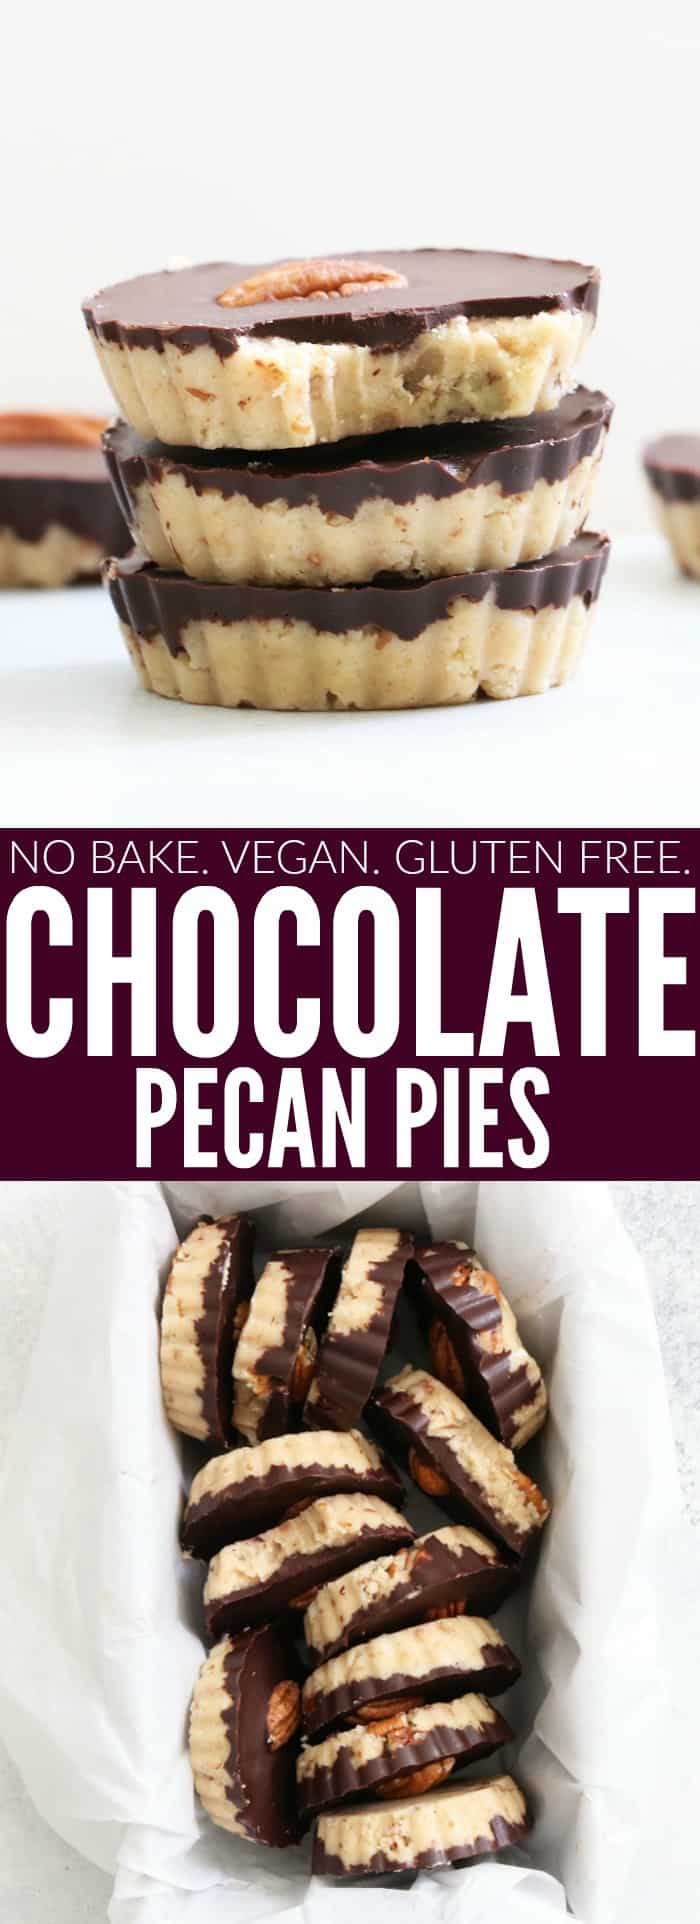 You'll love these No Bake Chocolate Pecan Pies!! I'm obsessed with how delicious + simple they are to make! Plus they're vegan, paleo, and gluten free! thetoastedpinenut.com #vegan #nobake #dessert #glutenfree #recipe